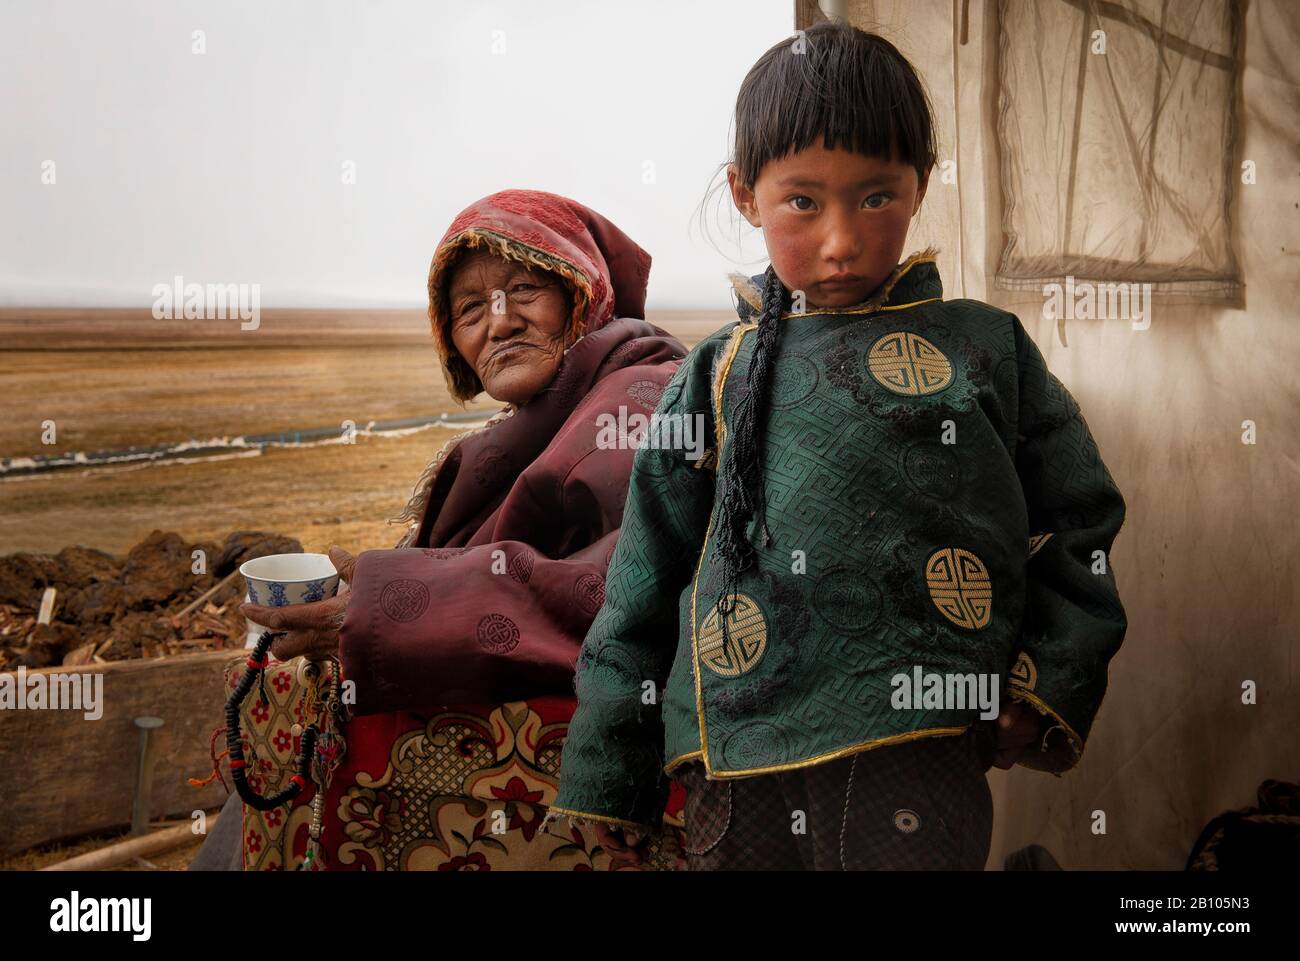 Tibetan families stick together. While parents work in the fields herding yaks, grandparents are in charge of looking after their grandchildren. Remote Tibetan plateau Stock Photo